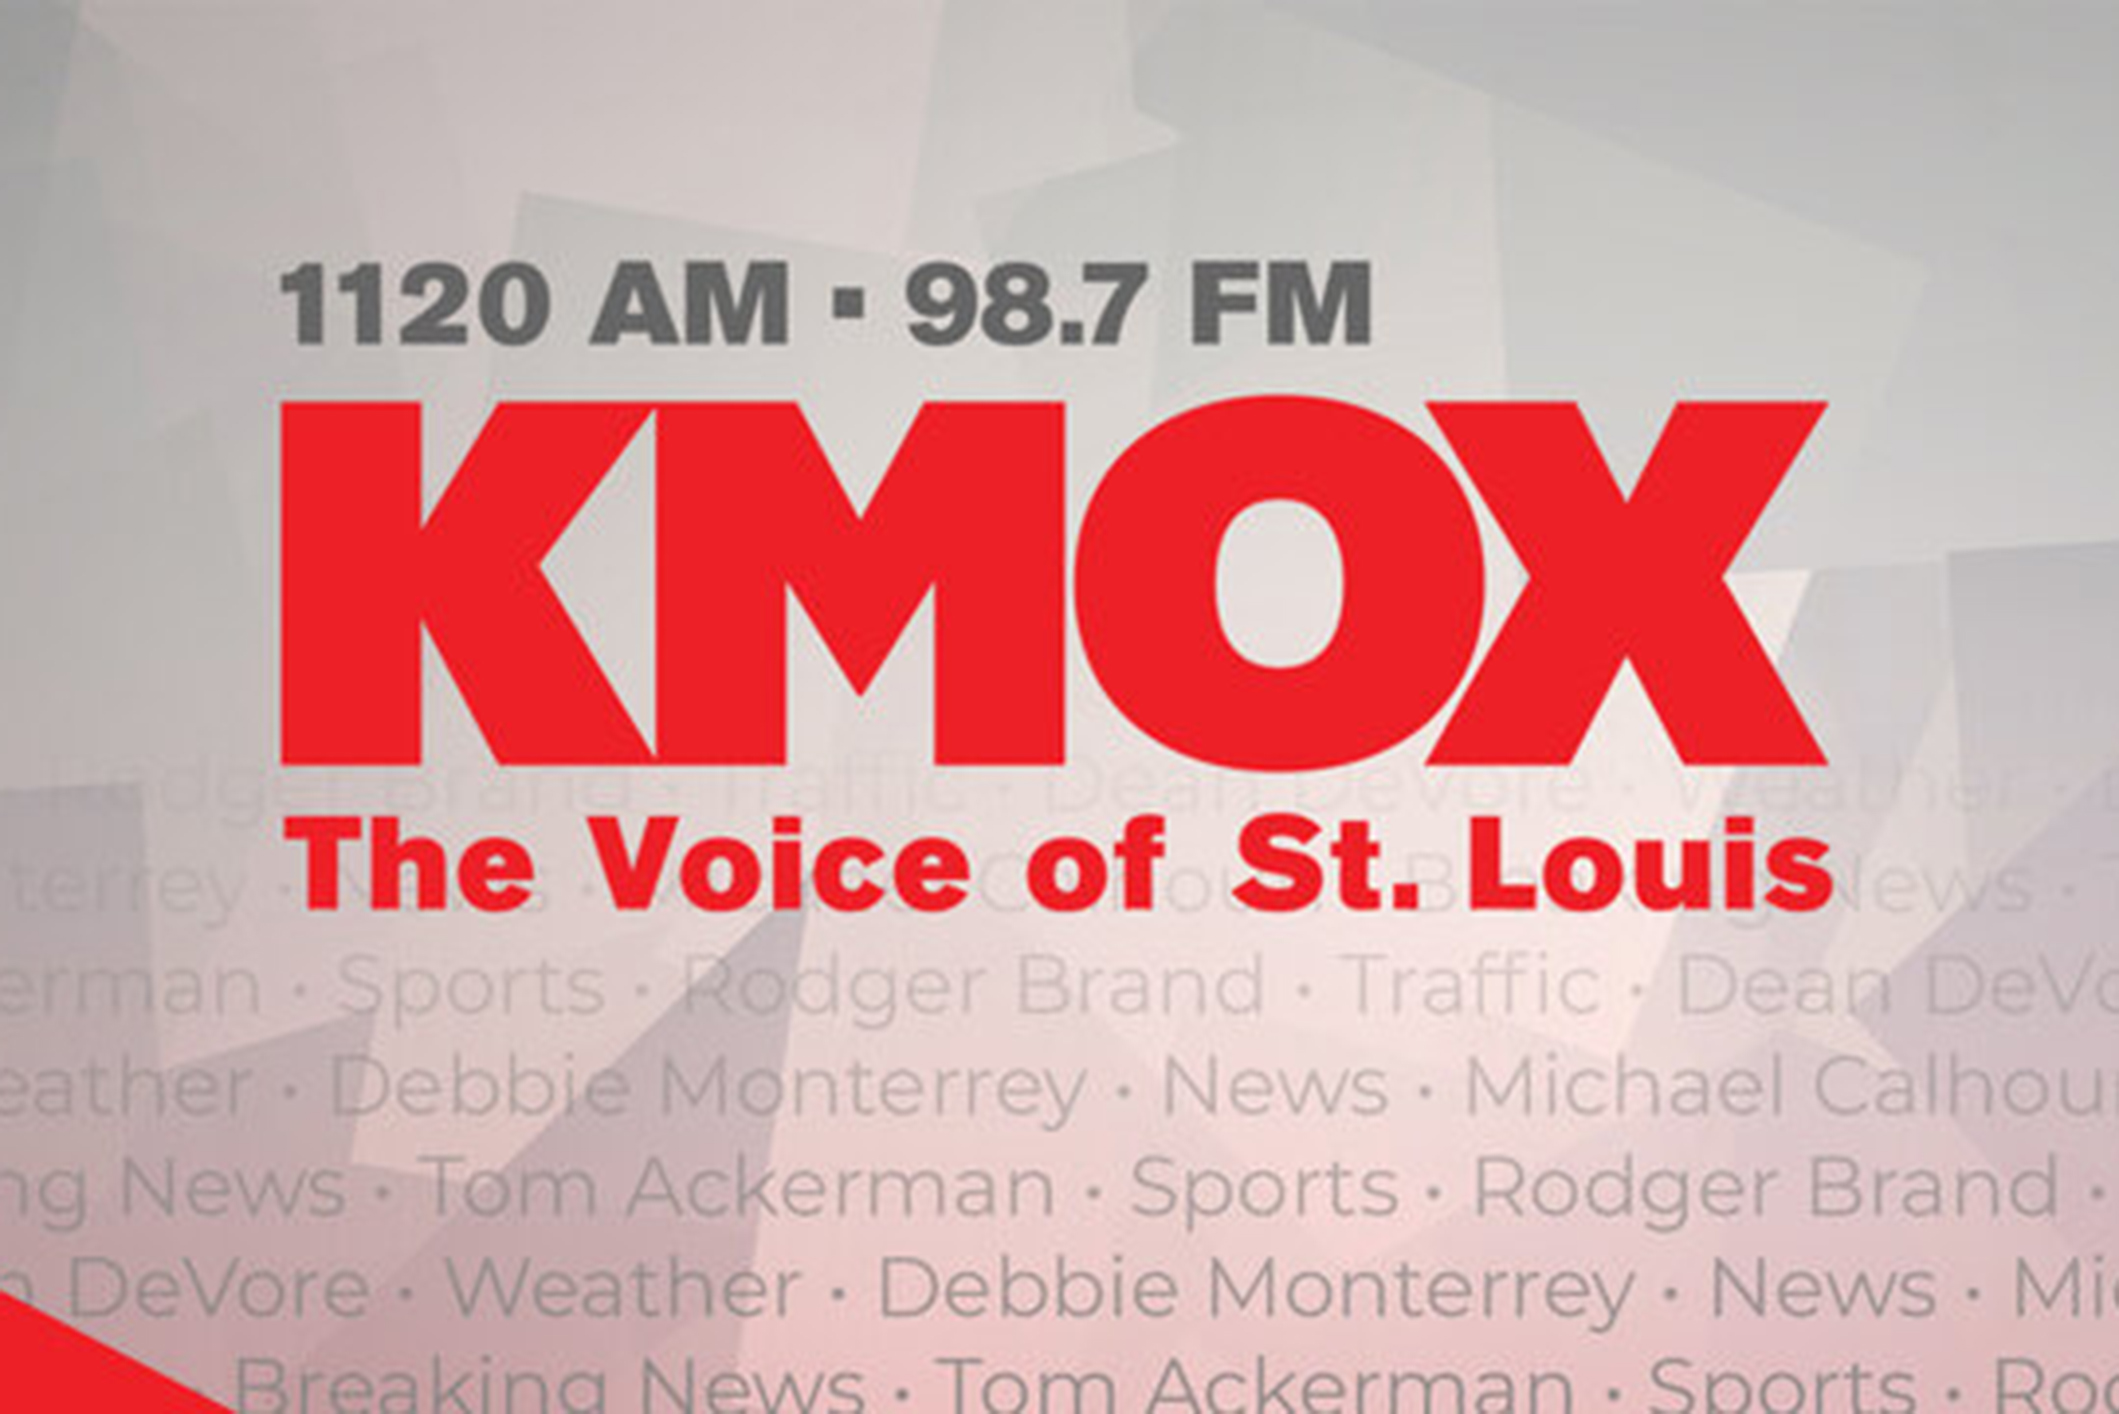 KMOX Total Information AM